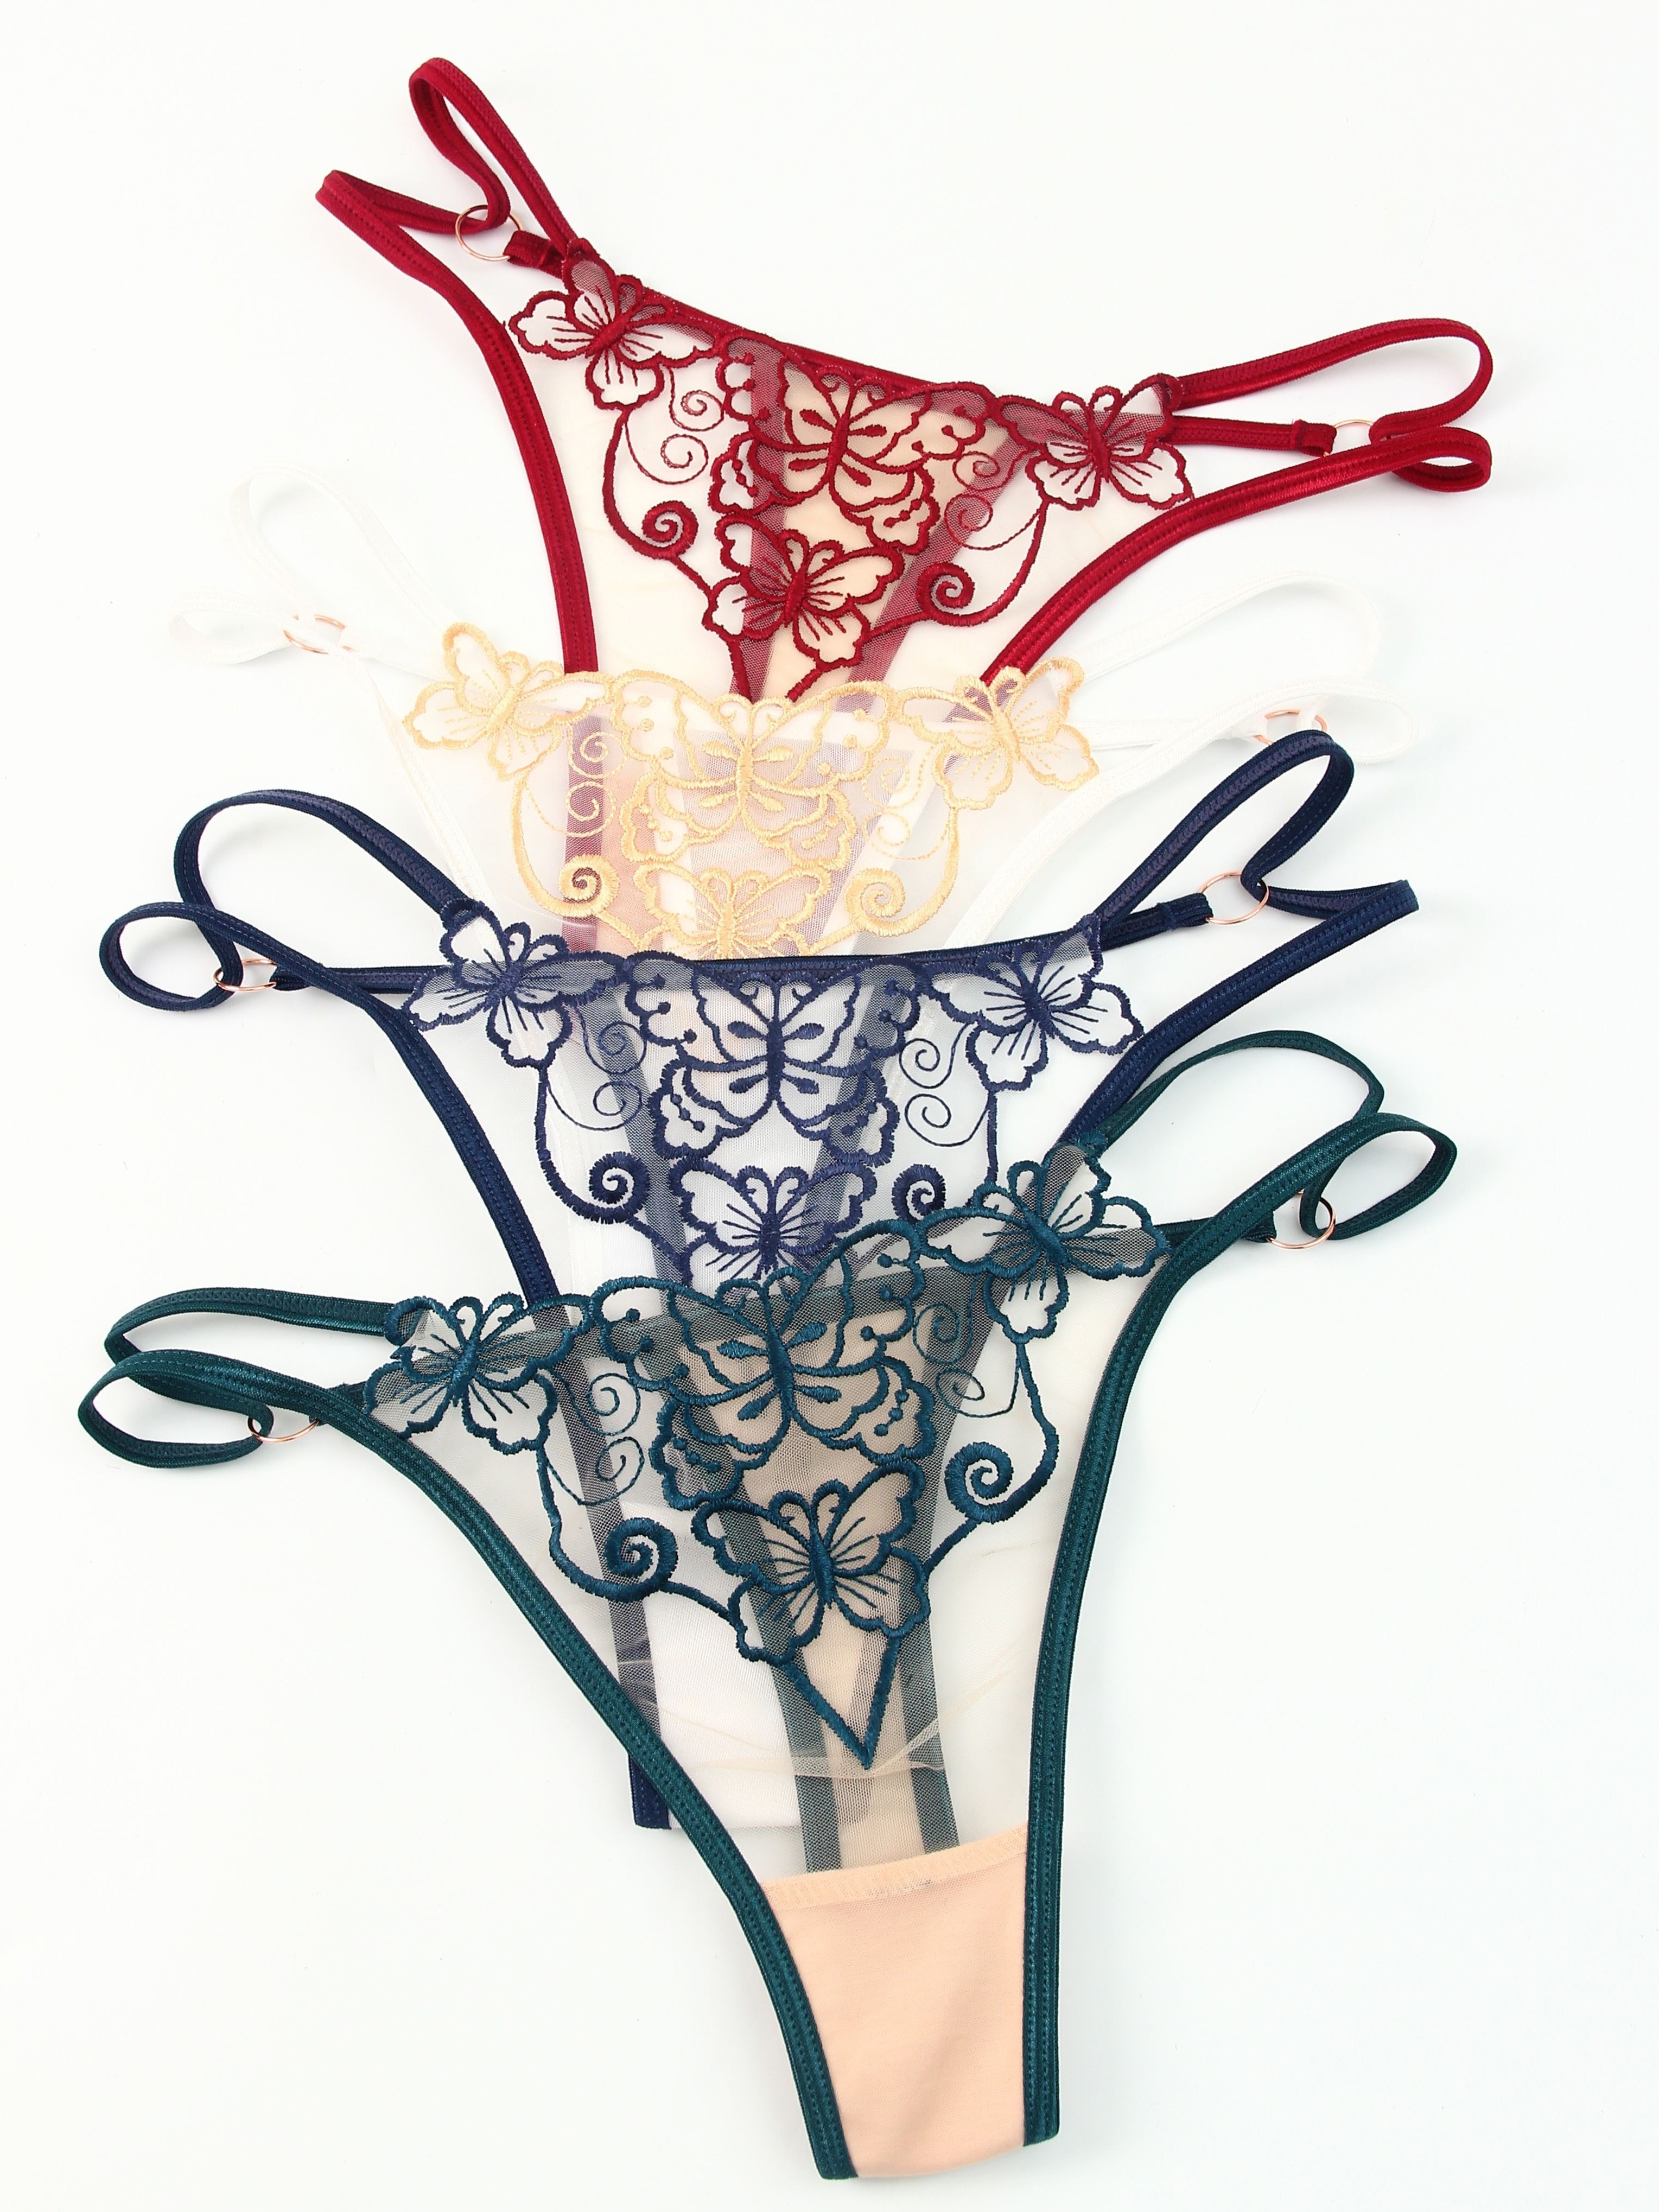 KNOWDREAM Sexy Panties Lace Floral Thong Ladies Embroidered Mesh